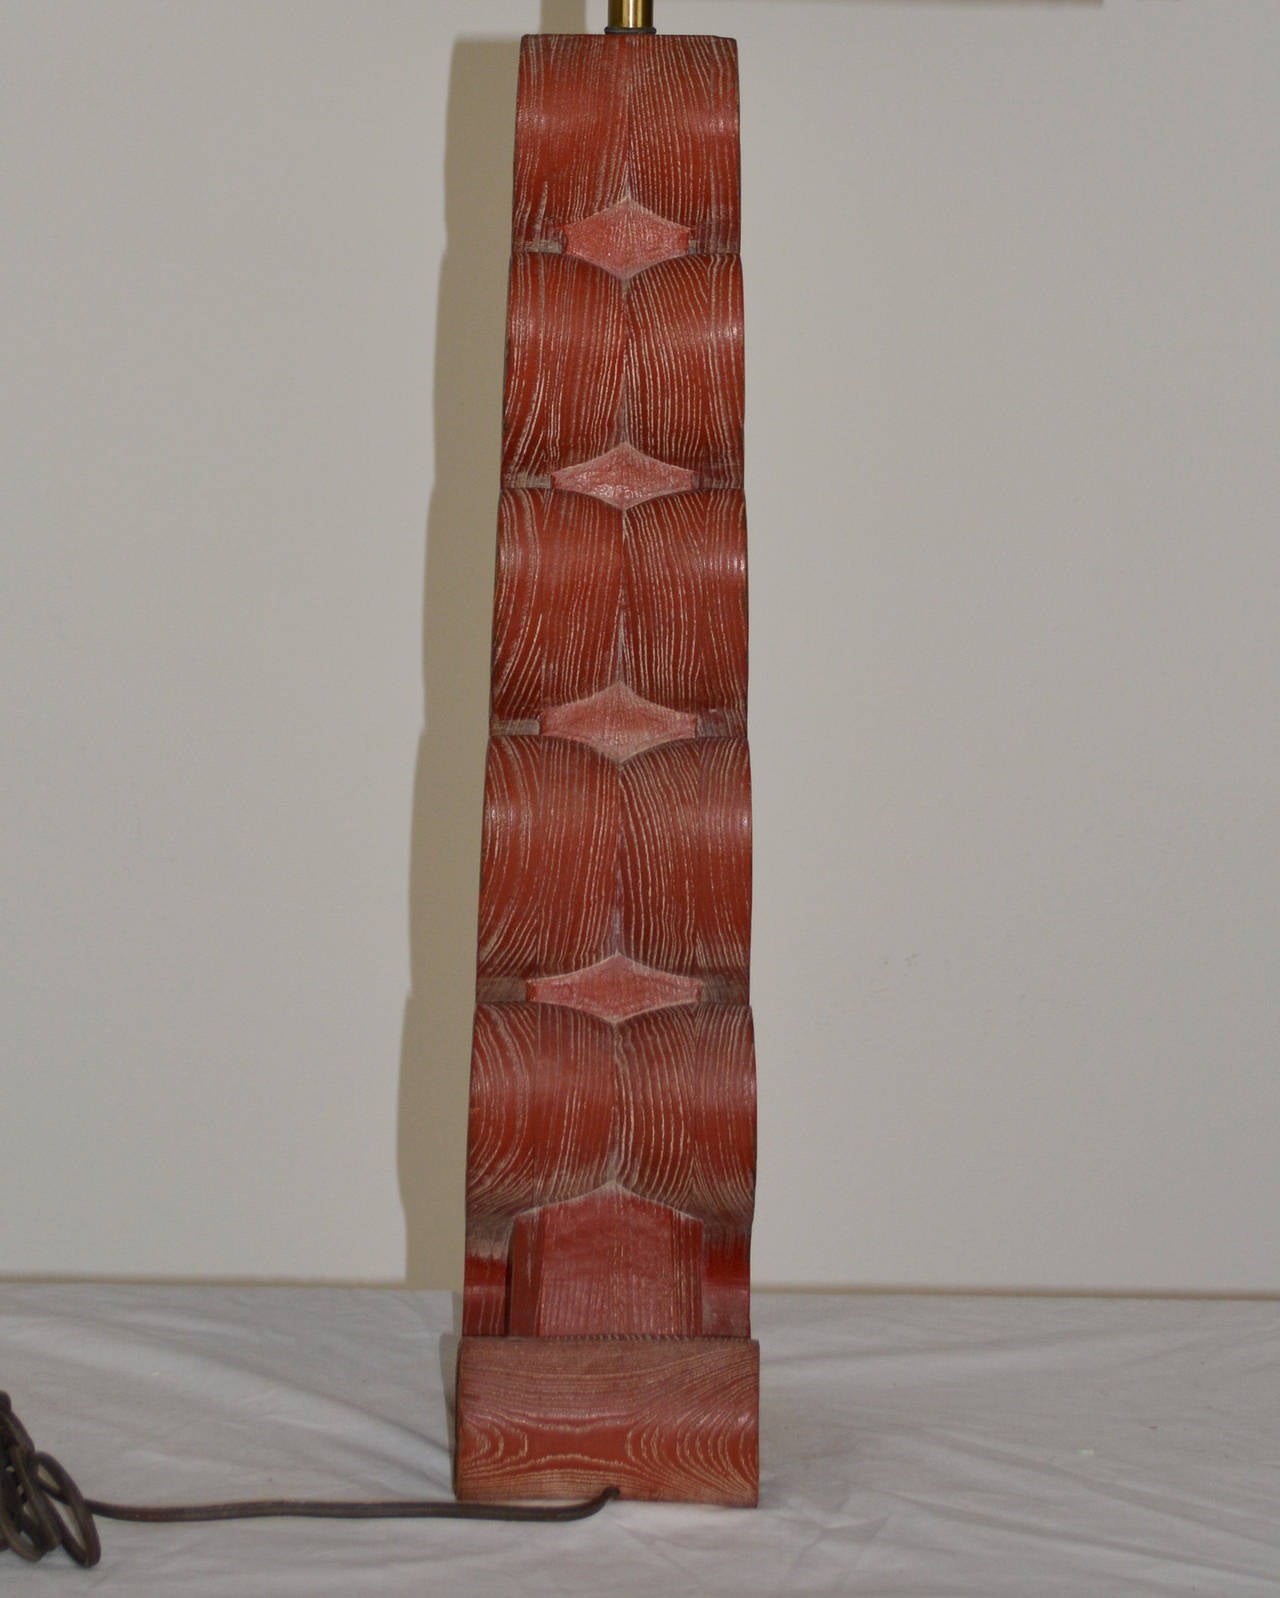 Wood Sculptural Mid-Century Modern Lamp For Sale